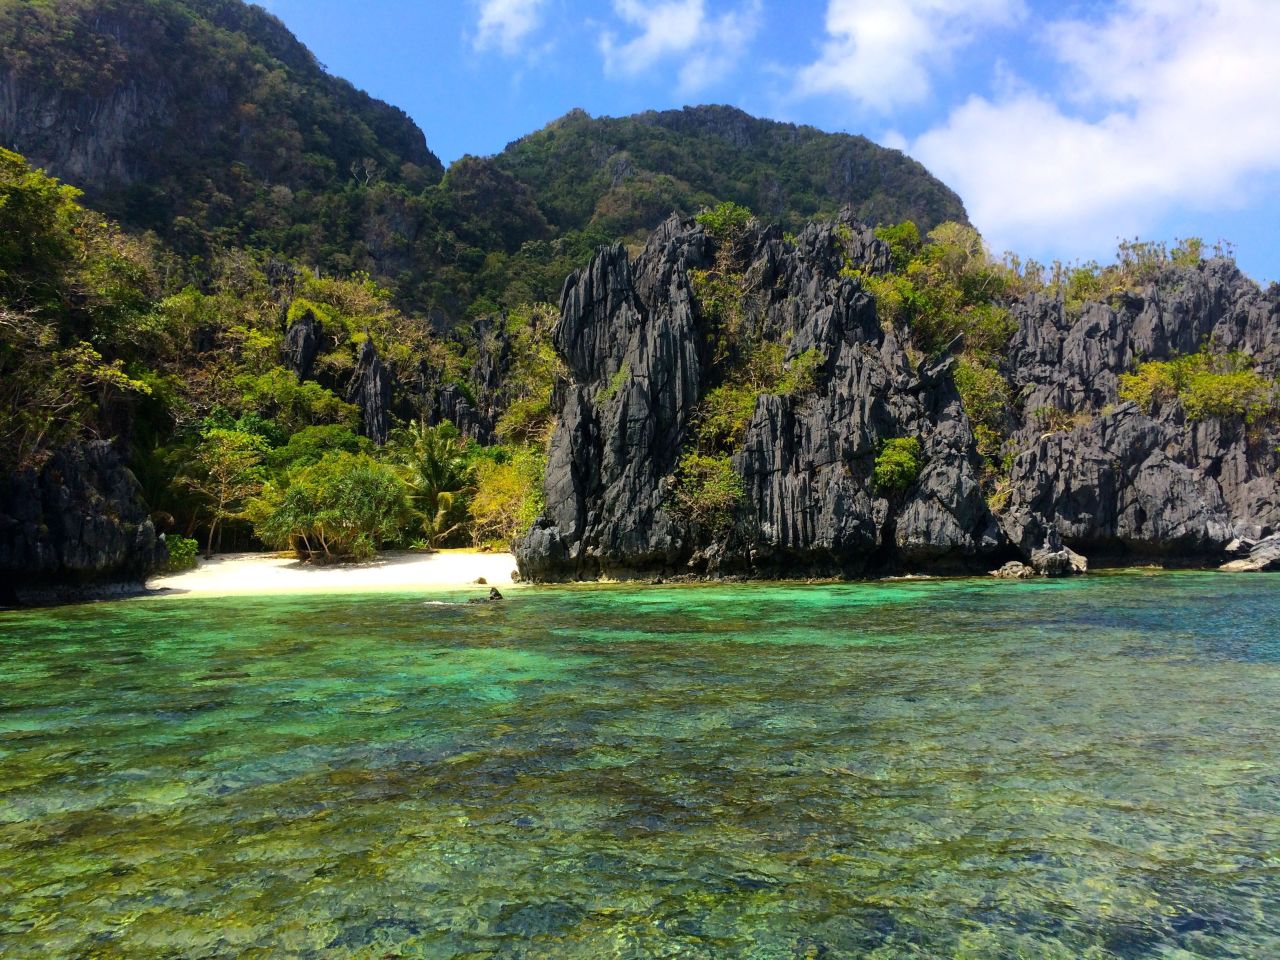 <a href="http://ireport.cnn.com/docs/DOC-1220098">Jonathan Baker</a>, 30, quit his job in aviation and logistics to travel the world. He took this shot of Paradise Beach near El Nido, Palawan. Palawan, the most southwestern large island of the Philippines, is surrounded by some 1,800 smaller islands and islets, including the lovely Bacuit Archipelago, where this shot was taken.<br />